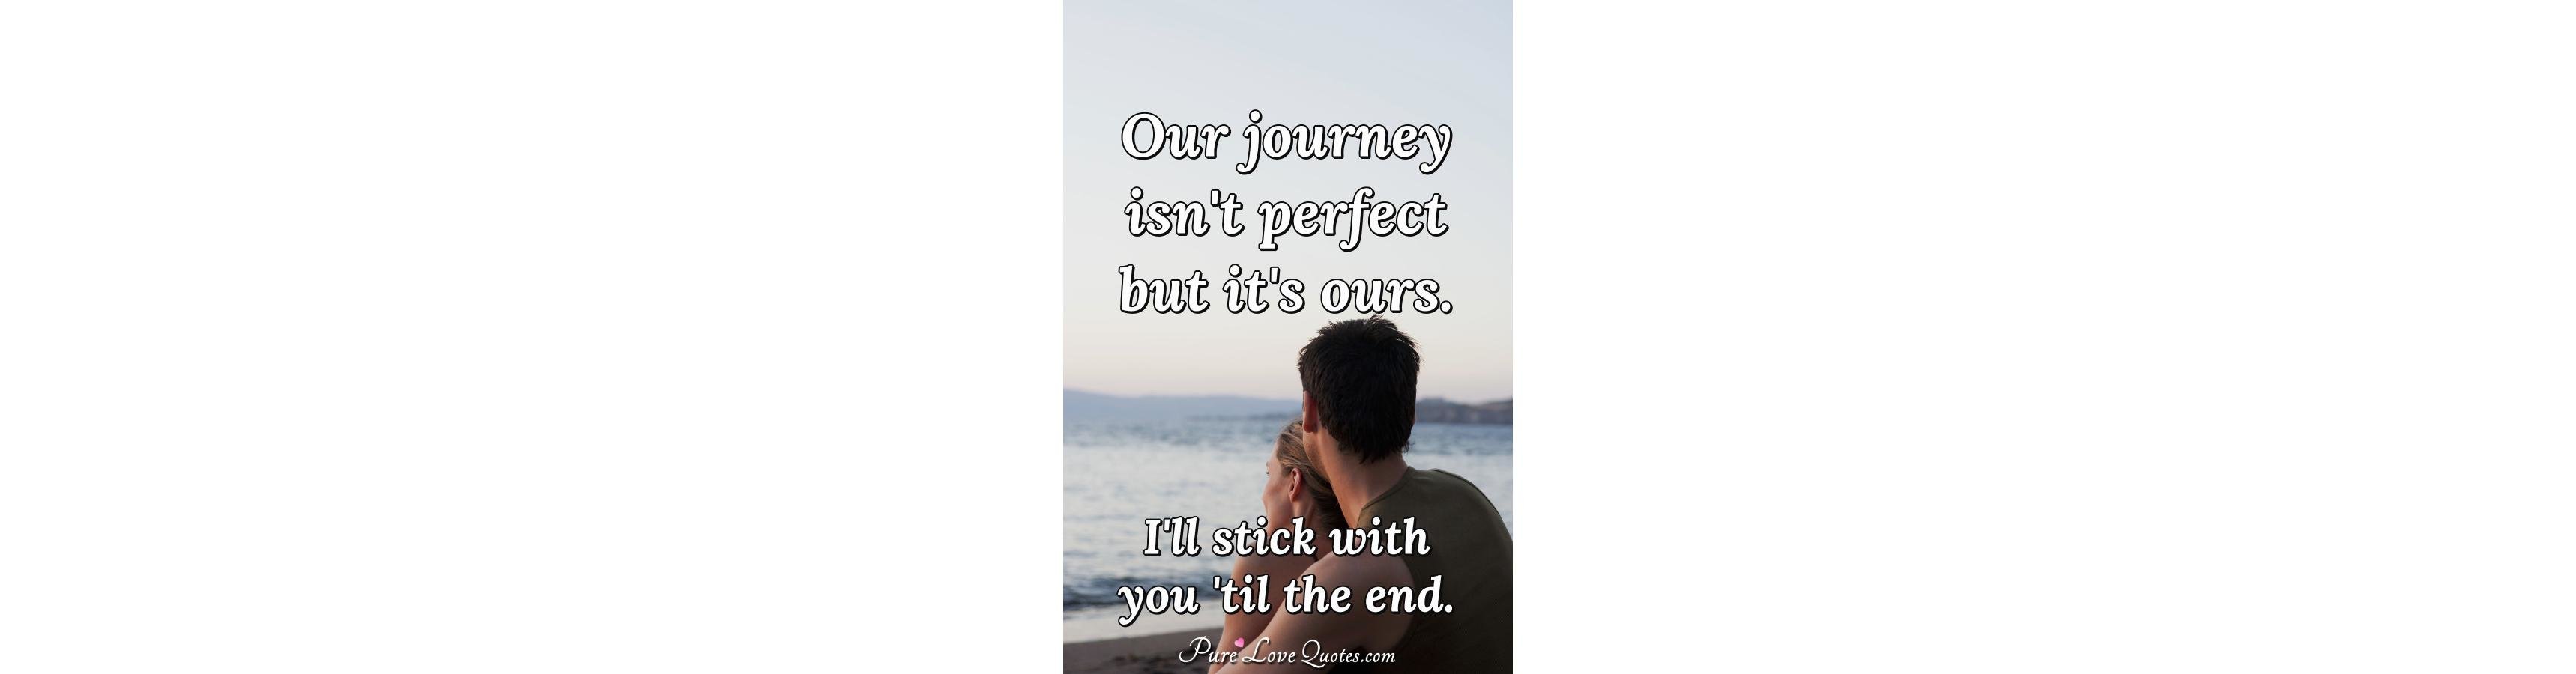 Our journey isn't perfect but it's ours. I'll stick with you 'til the